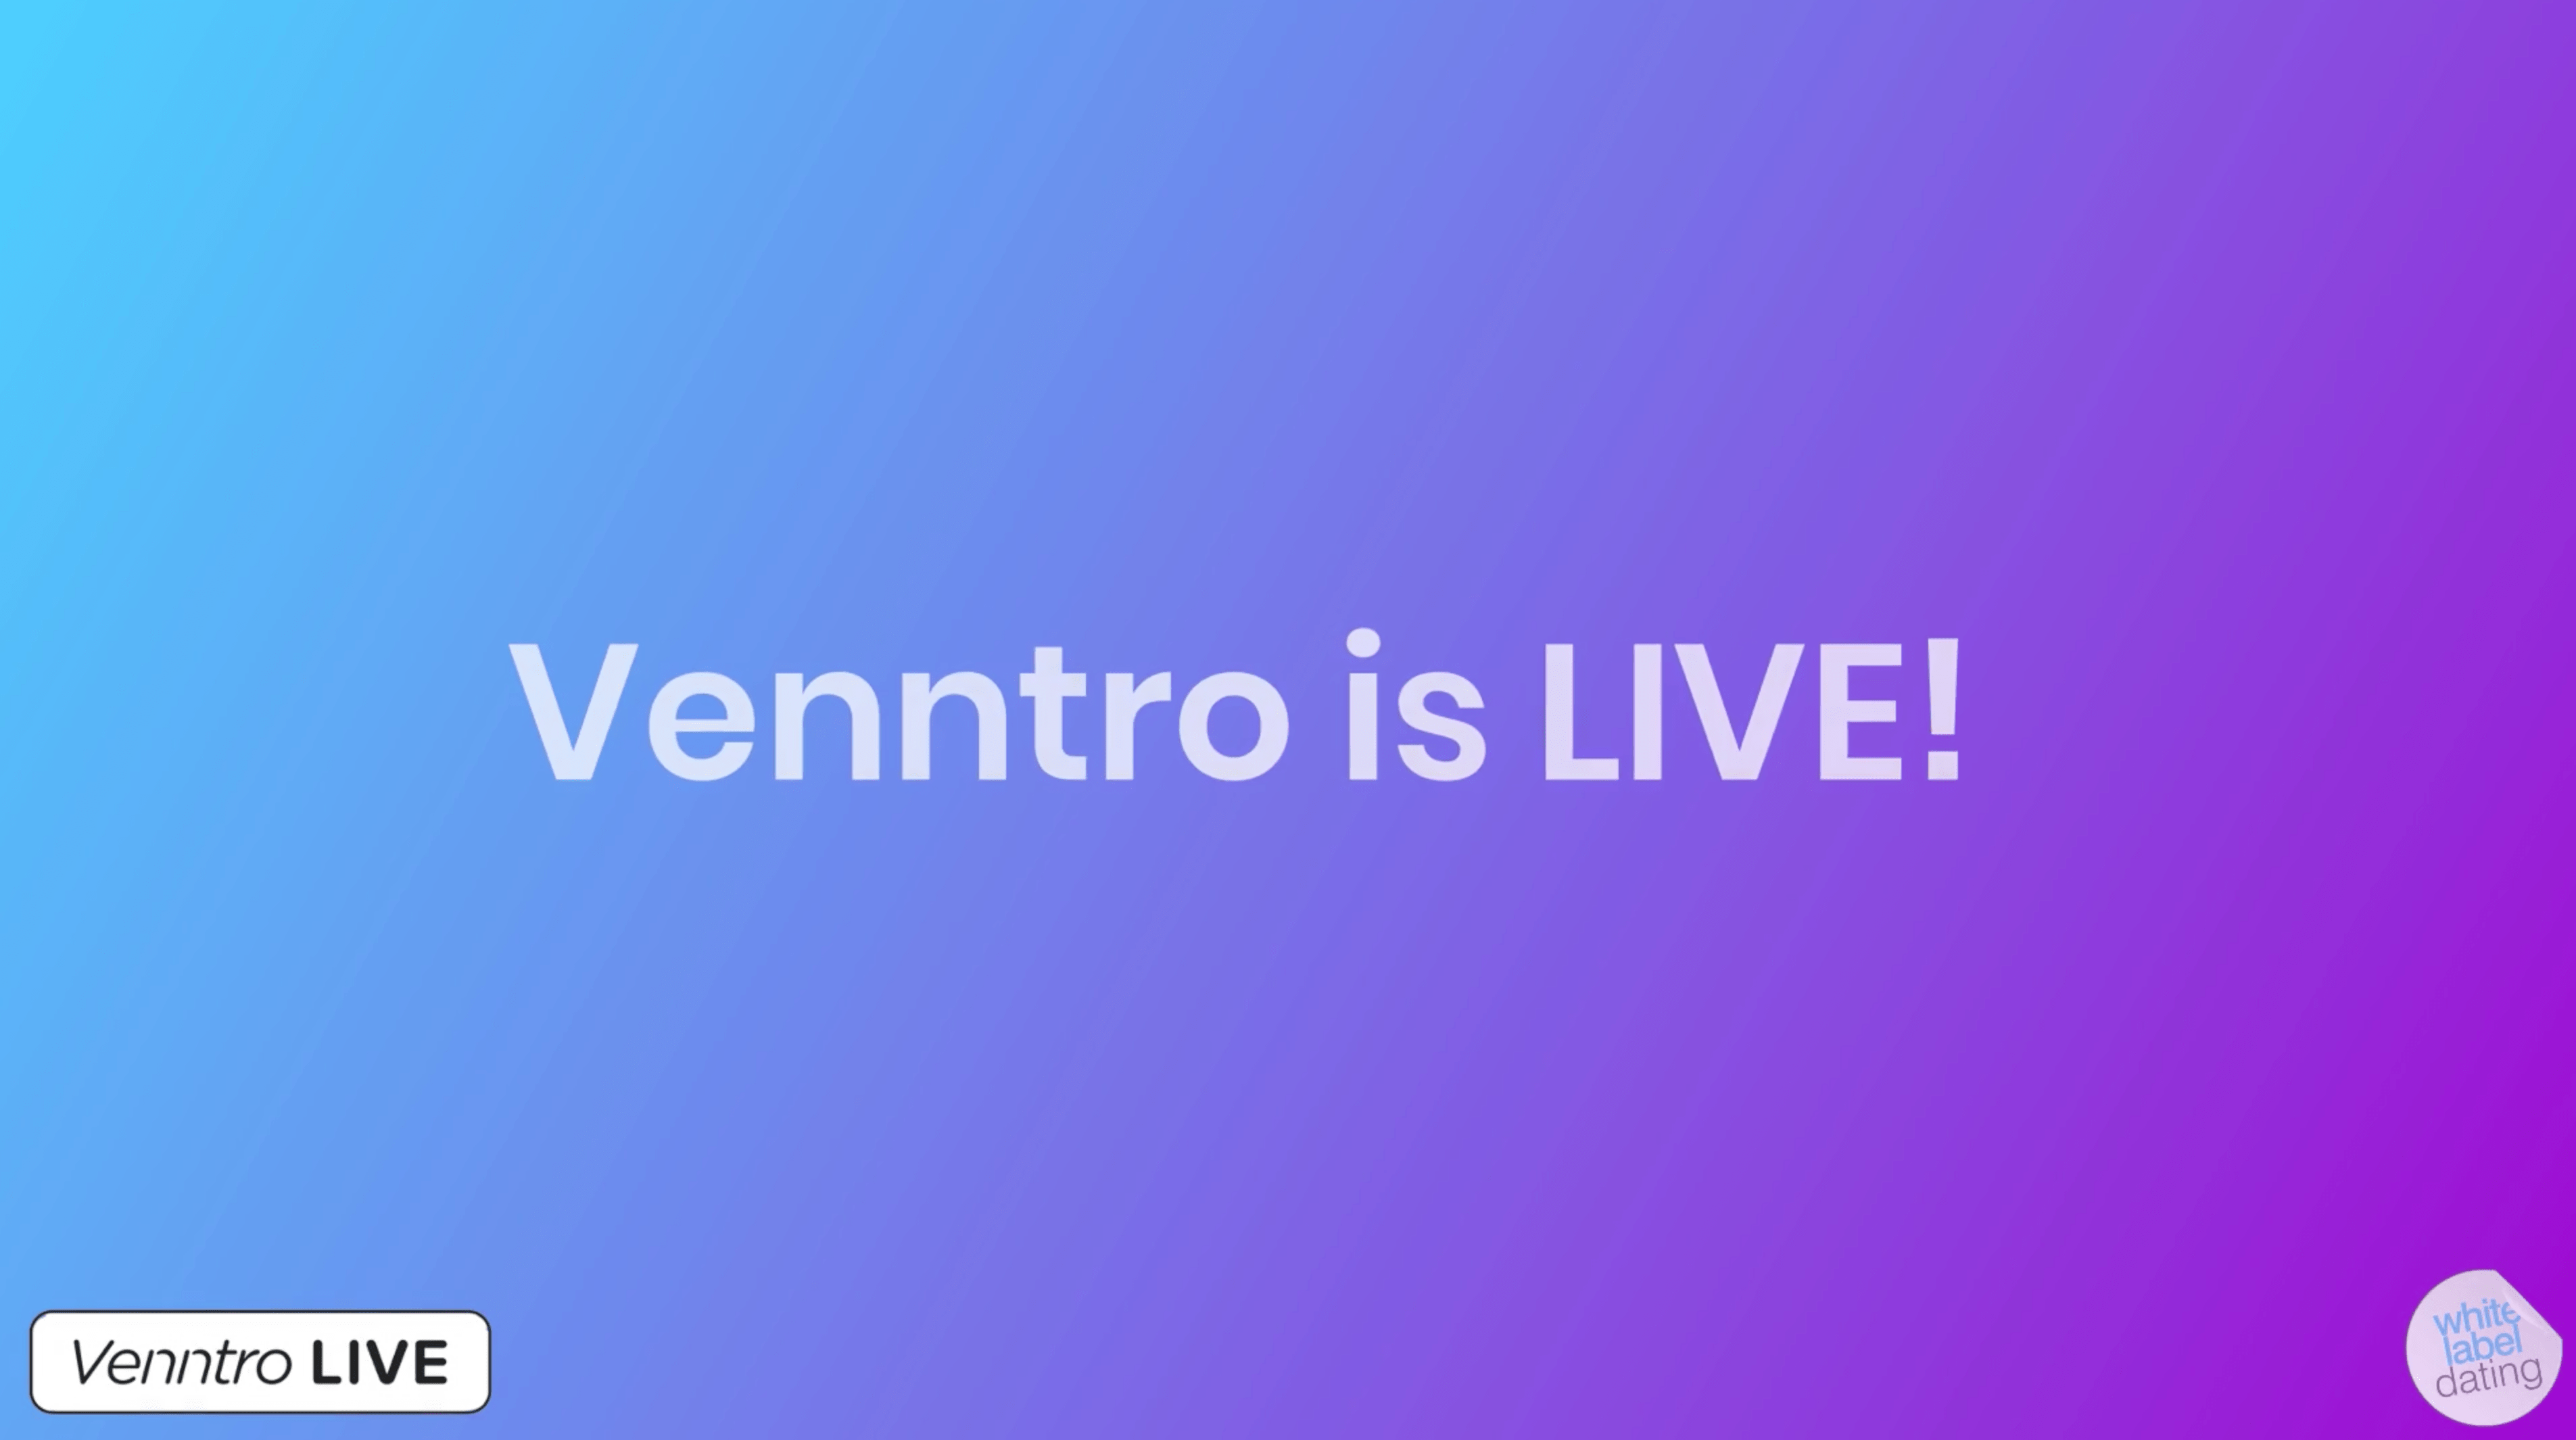 We’re going LIVE!